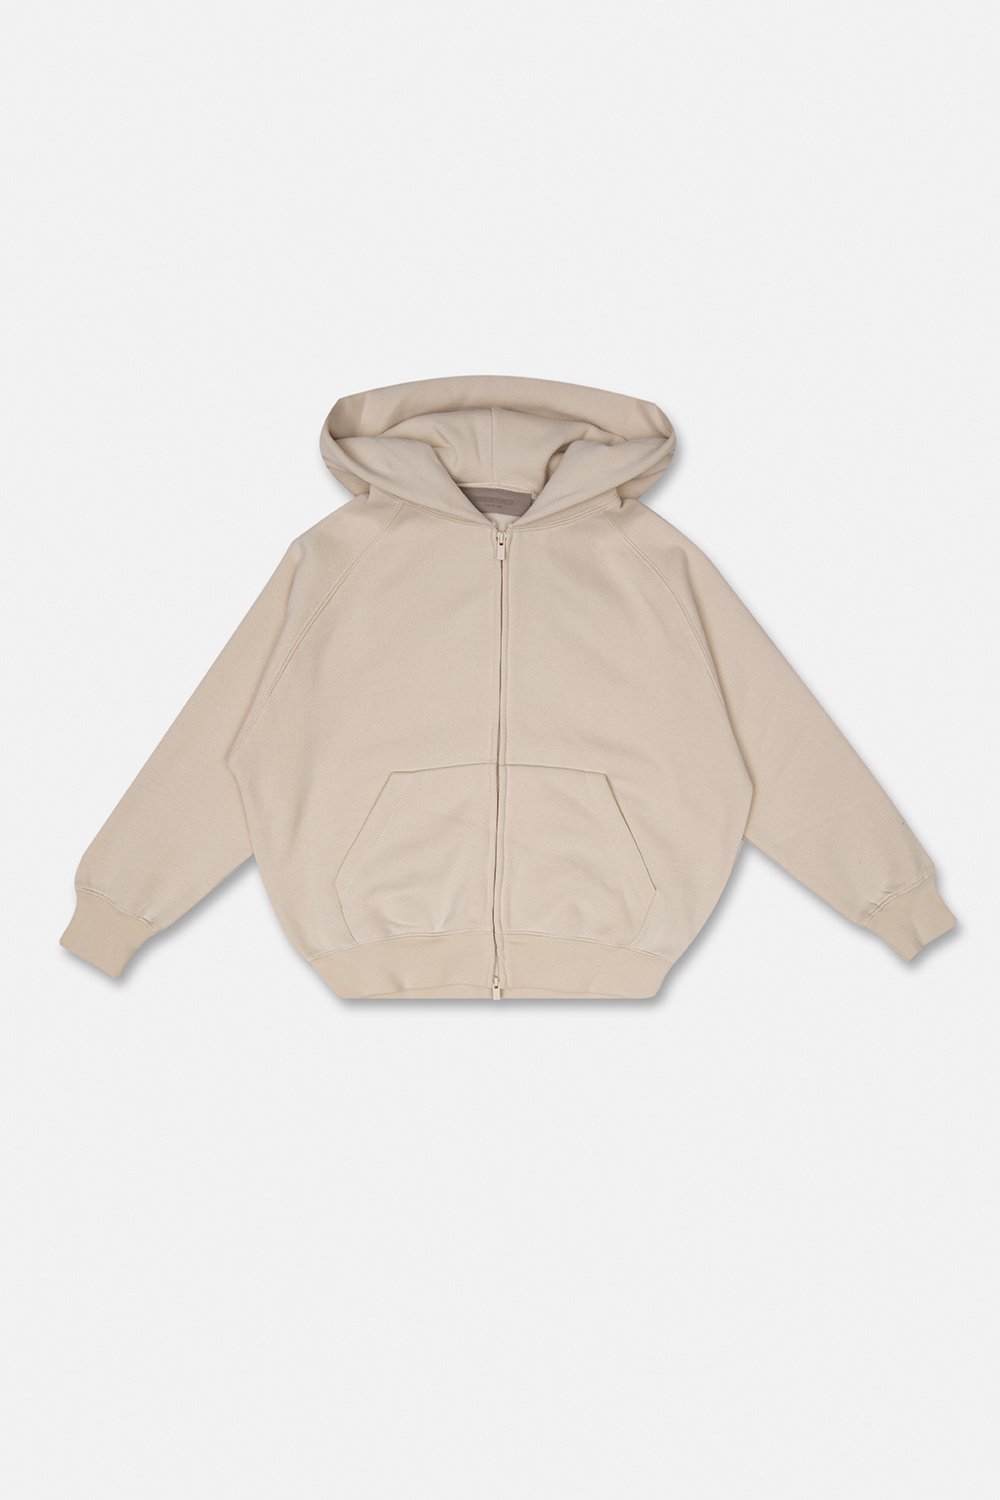 Fear of God Essentials Kids Logo Zip Hoodie in Egg Shell, Size S | End Clothing